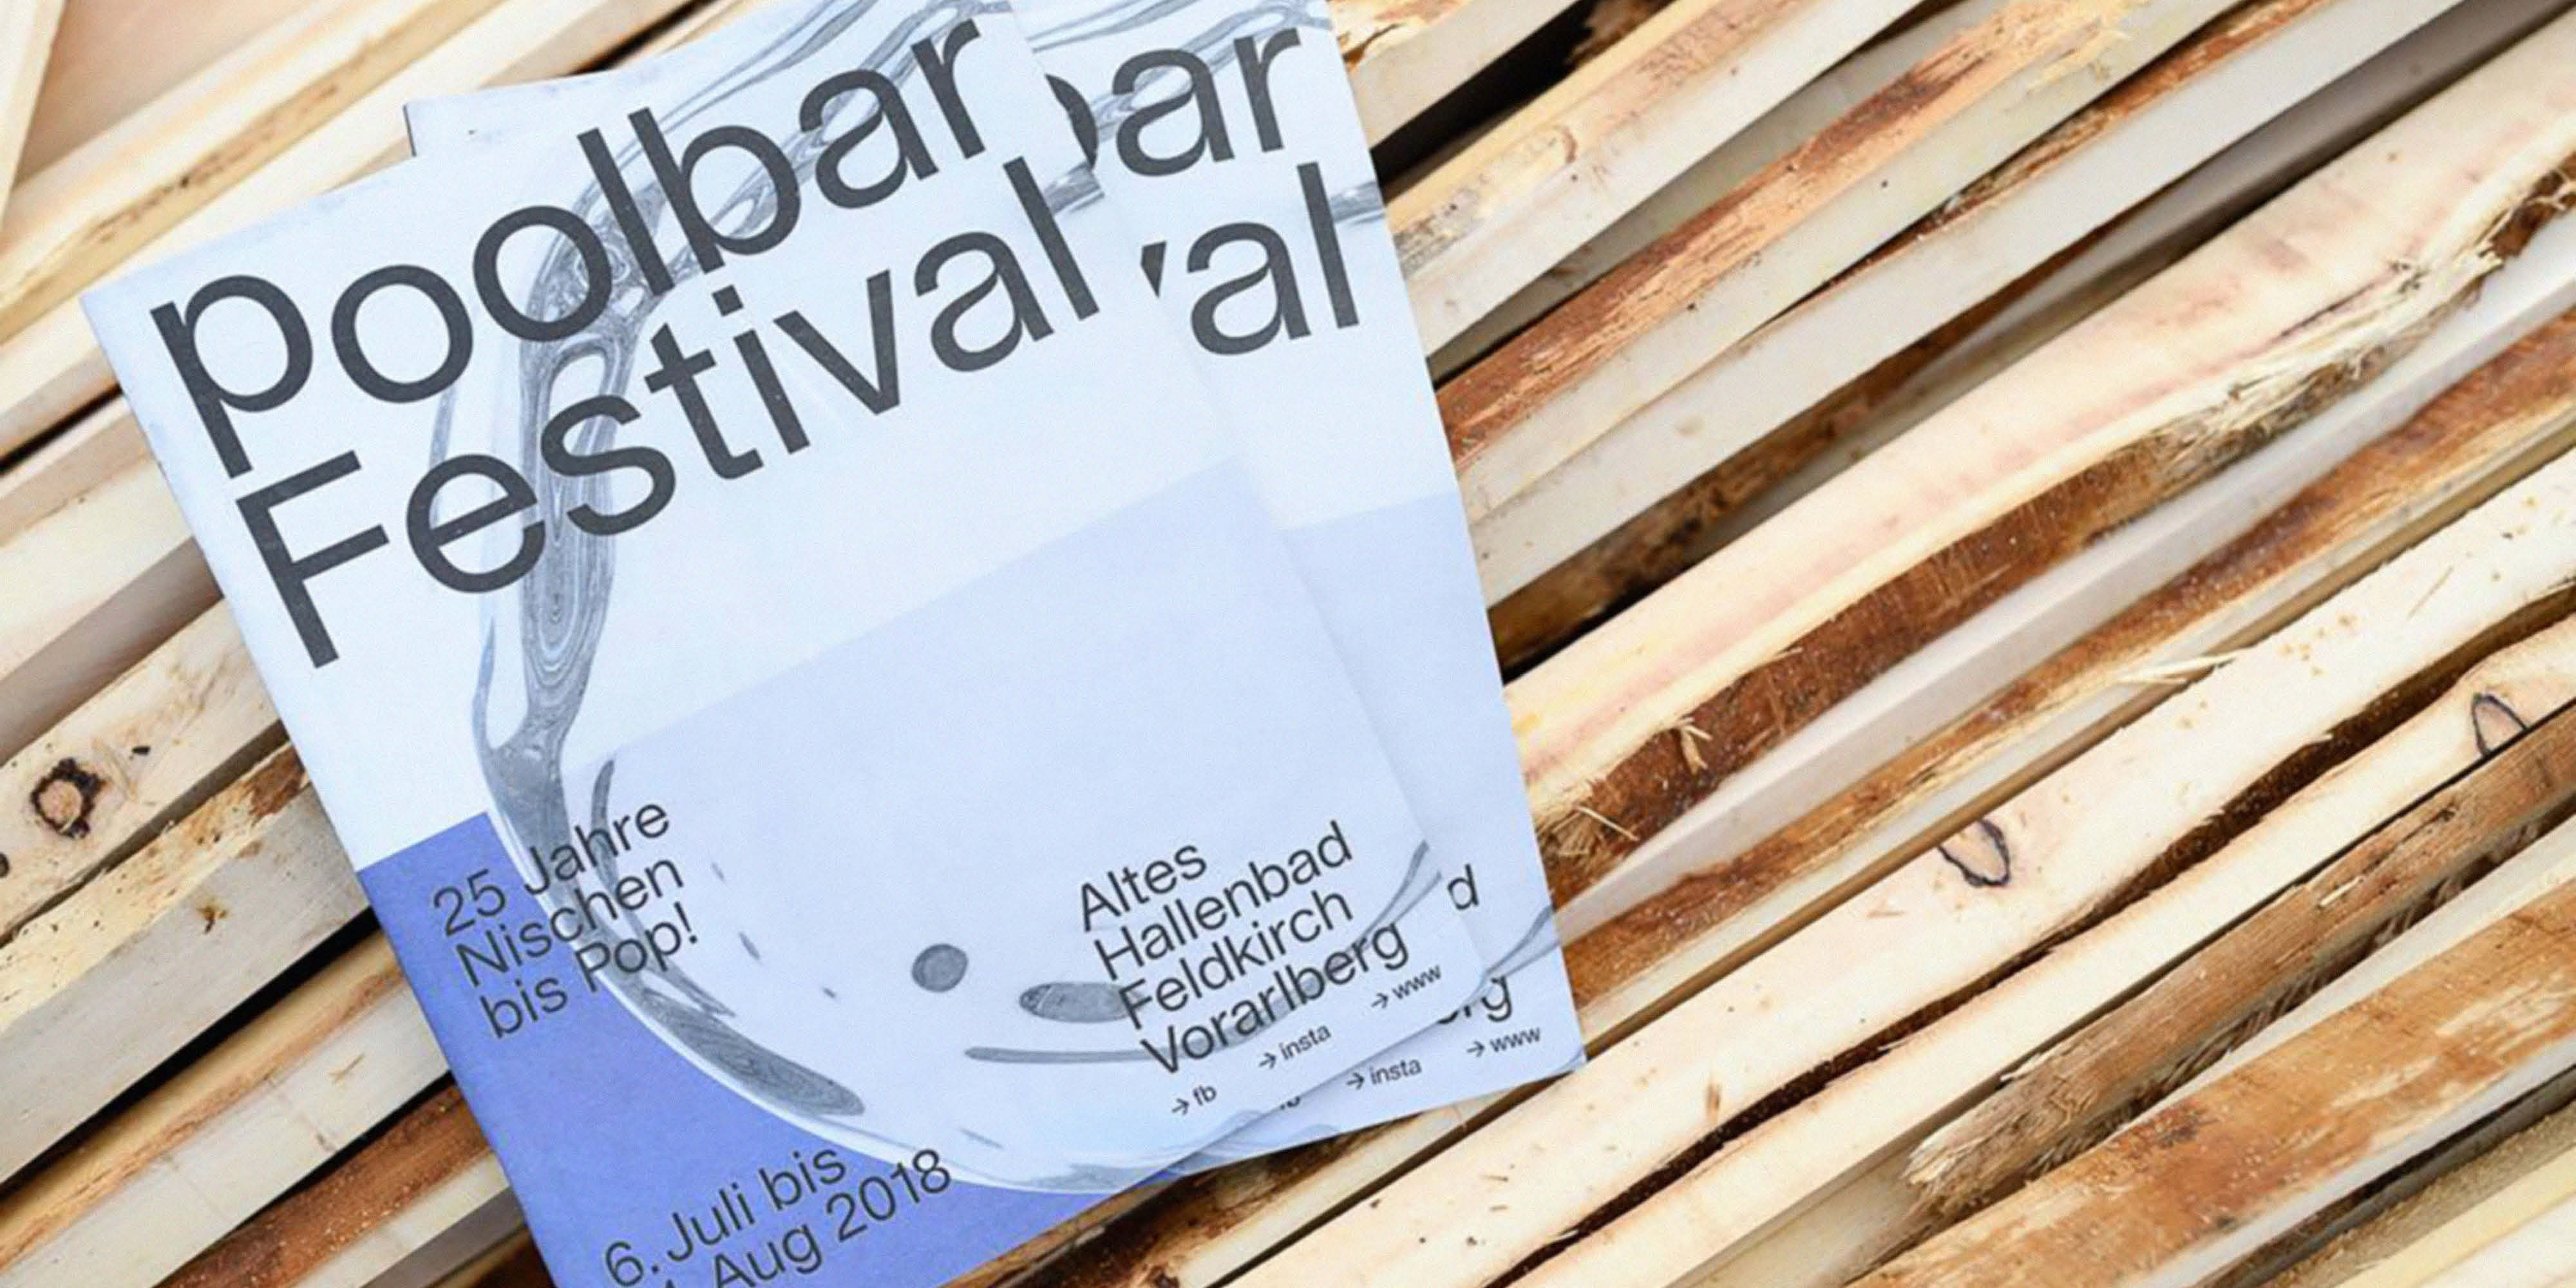 Cover image for Poolbar Festival